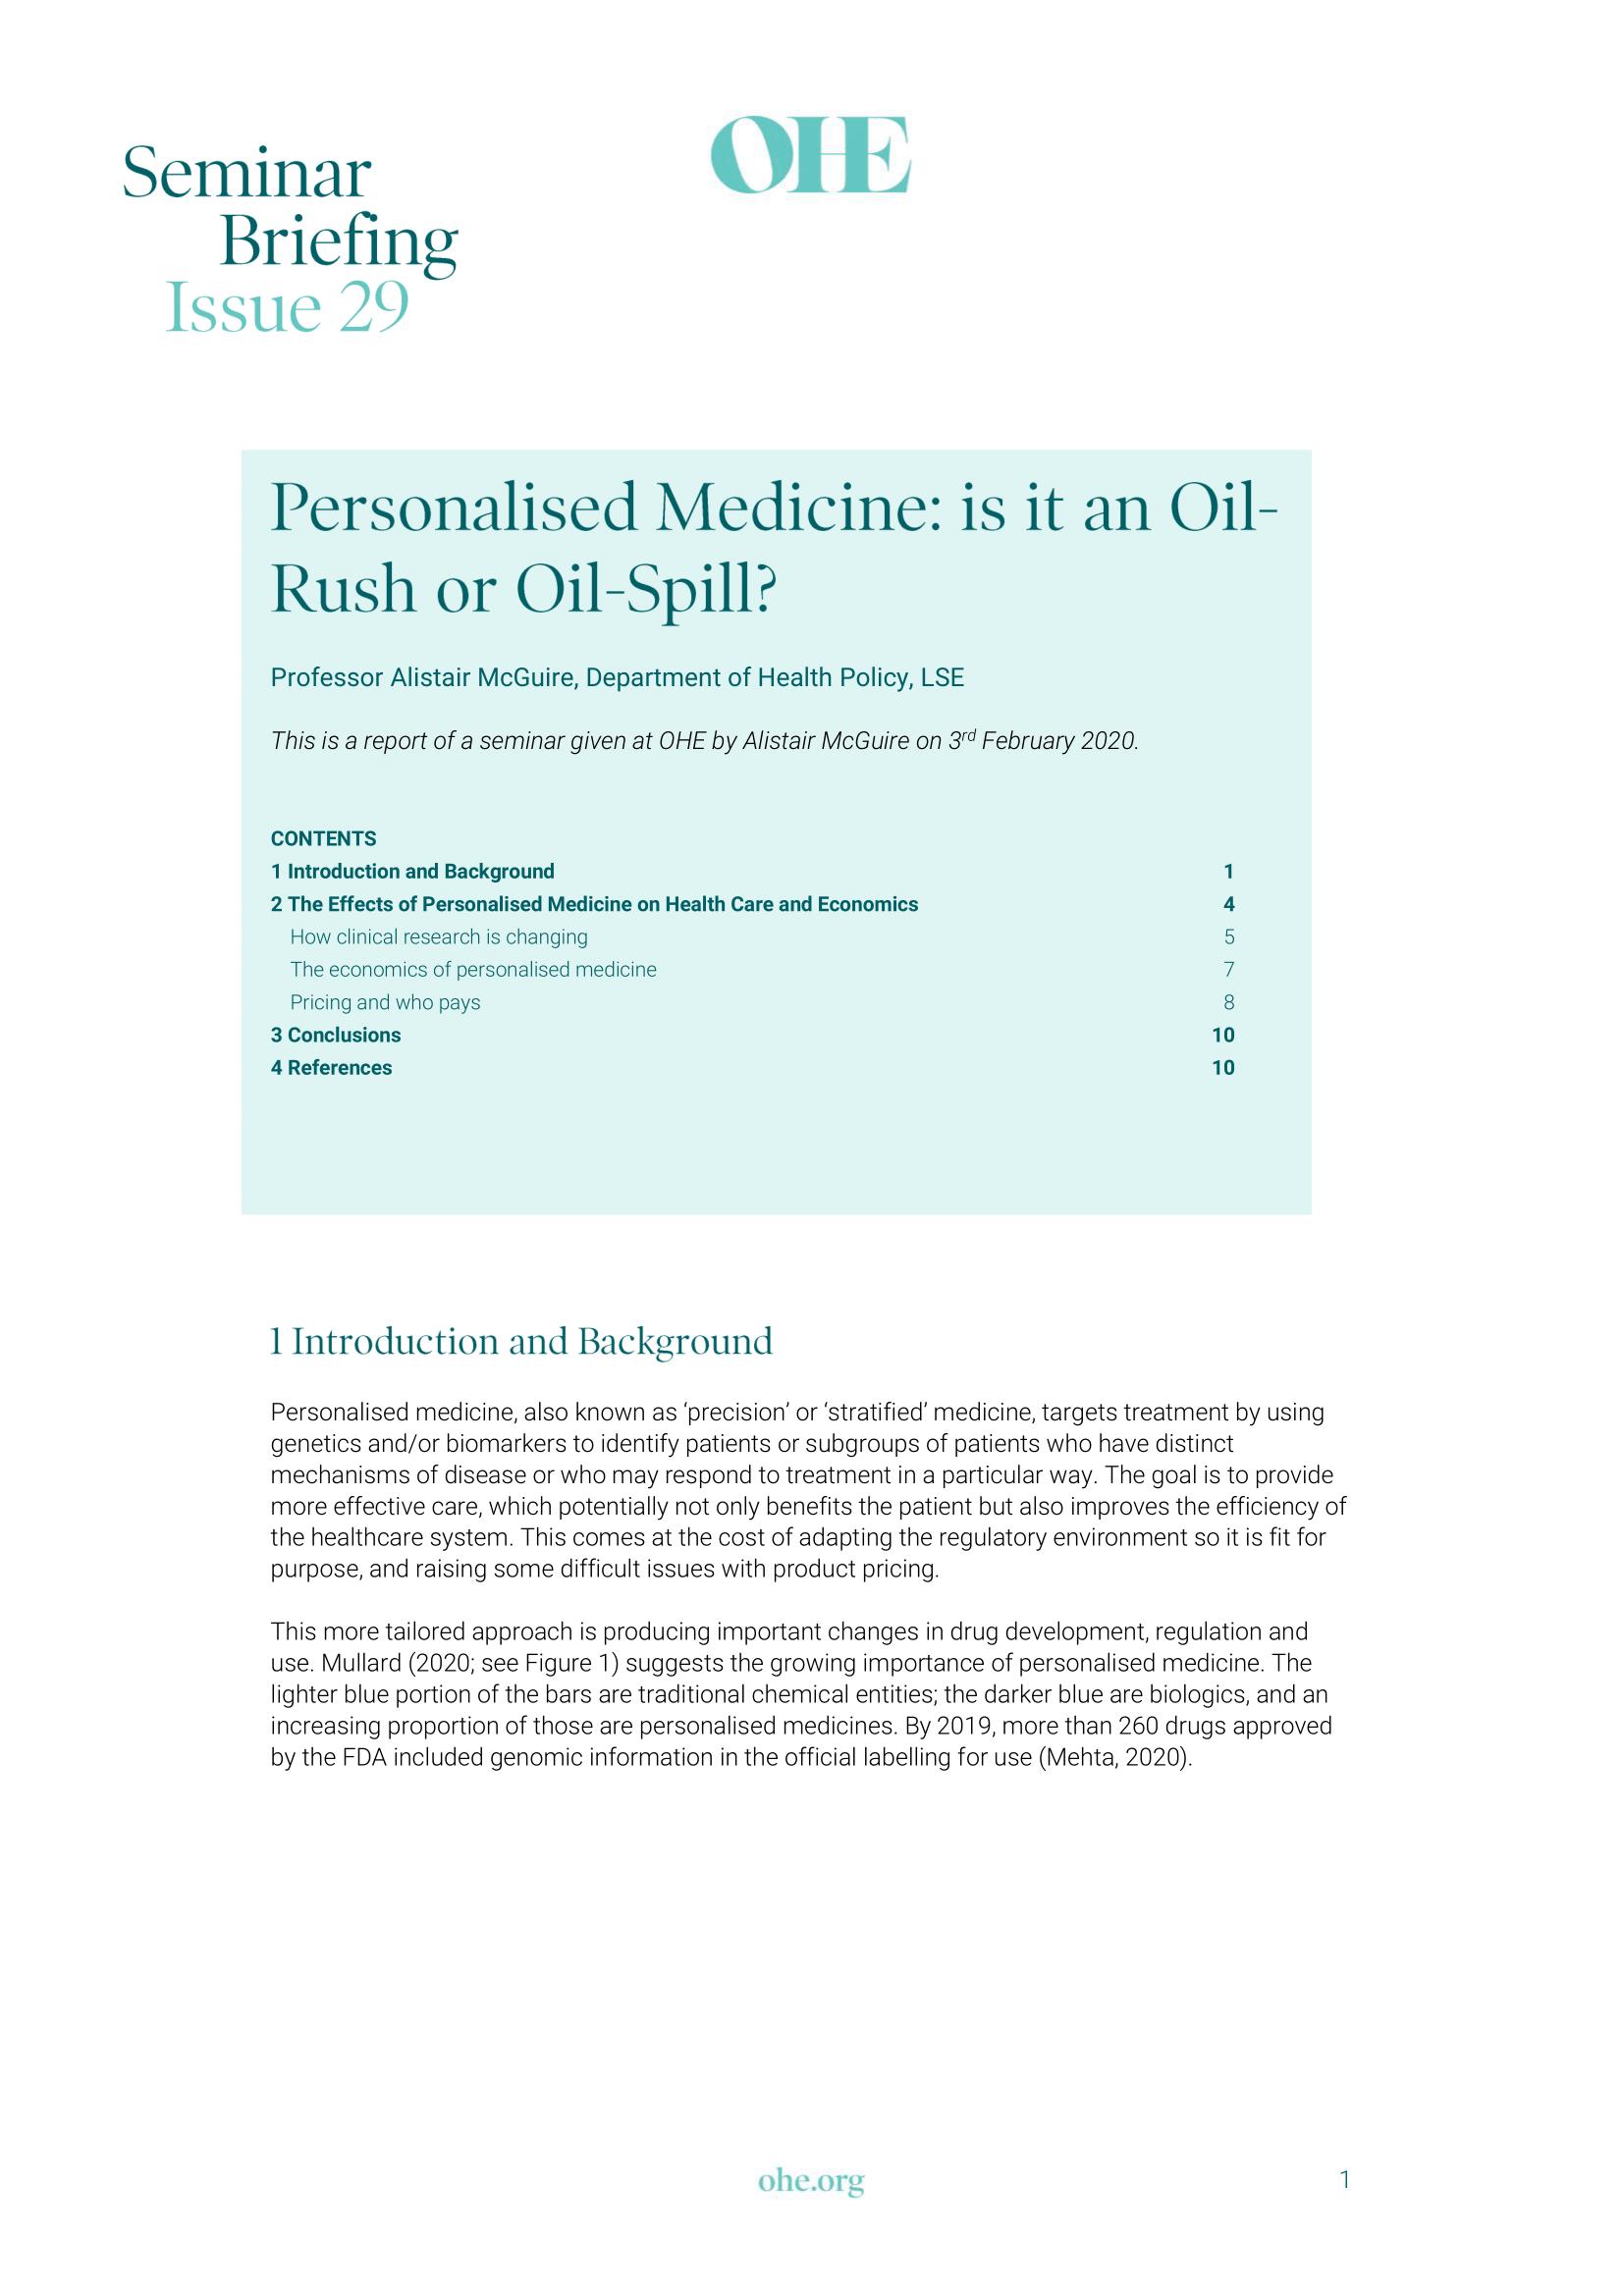 Personalised Medicine: is it an Oil-Rush or Oil-Spill?